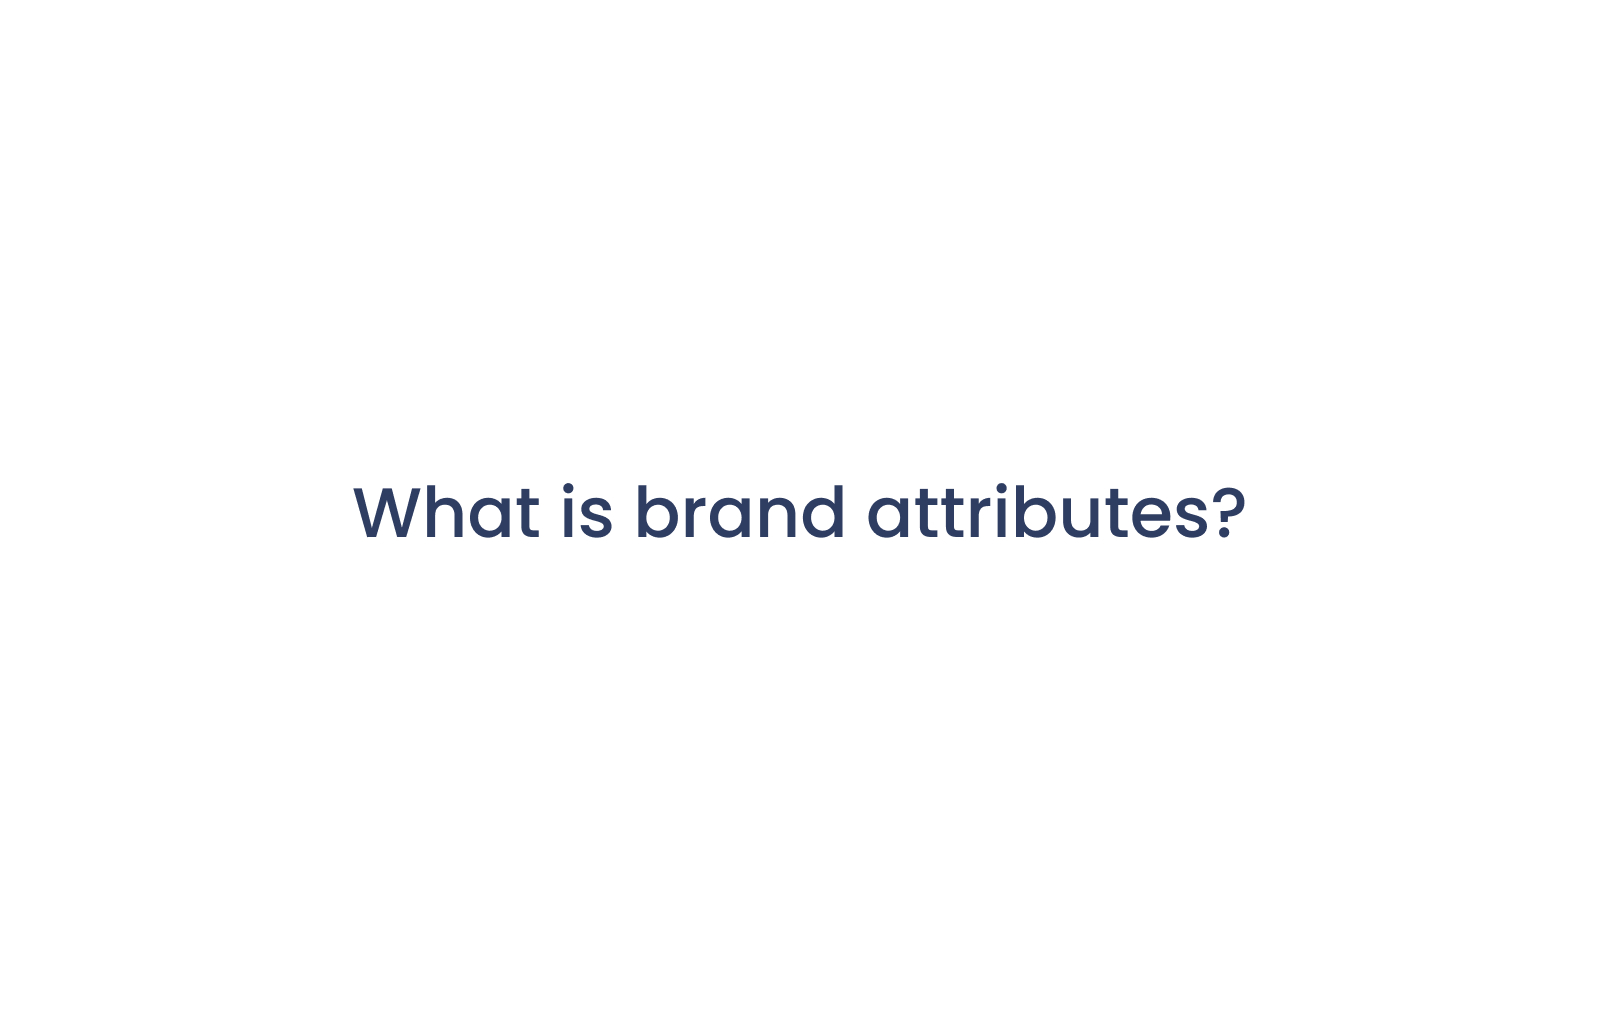 What is brand attributes?